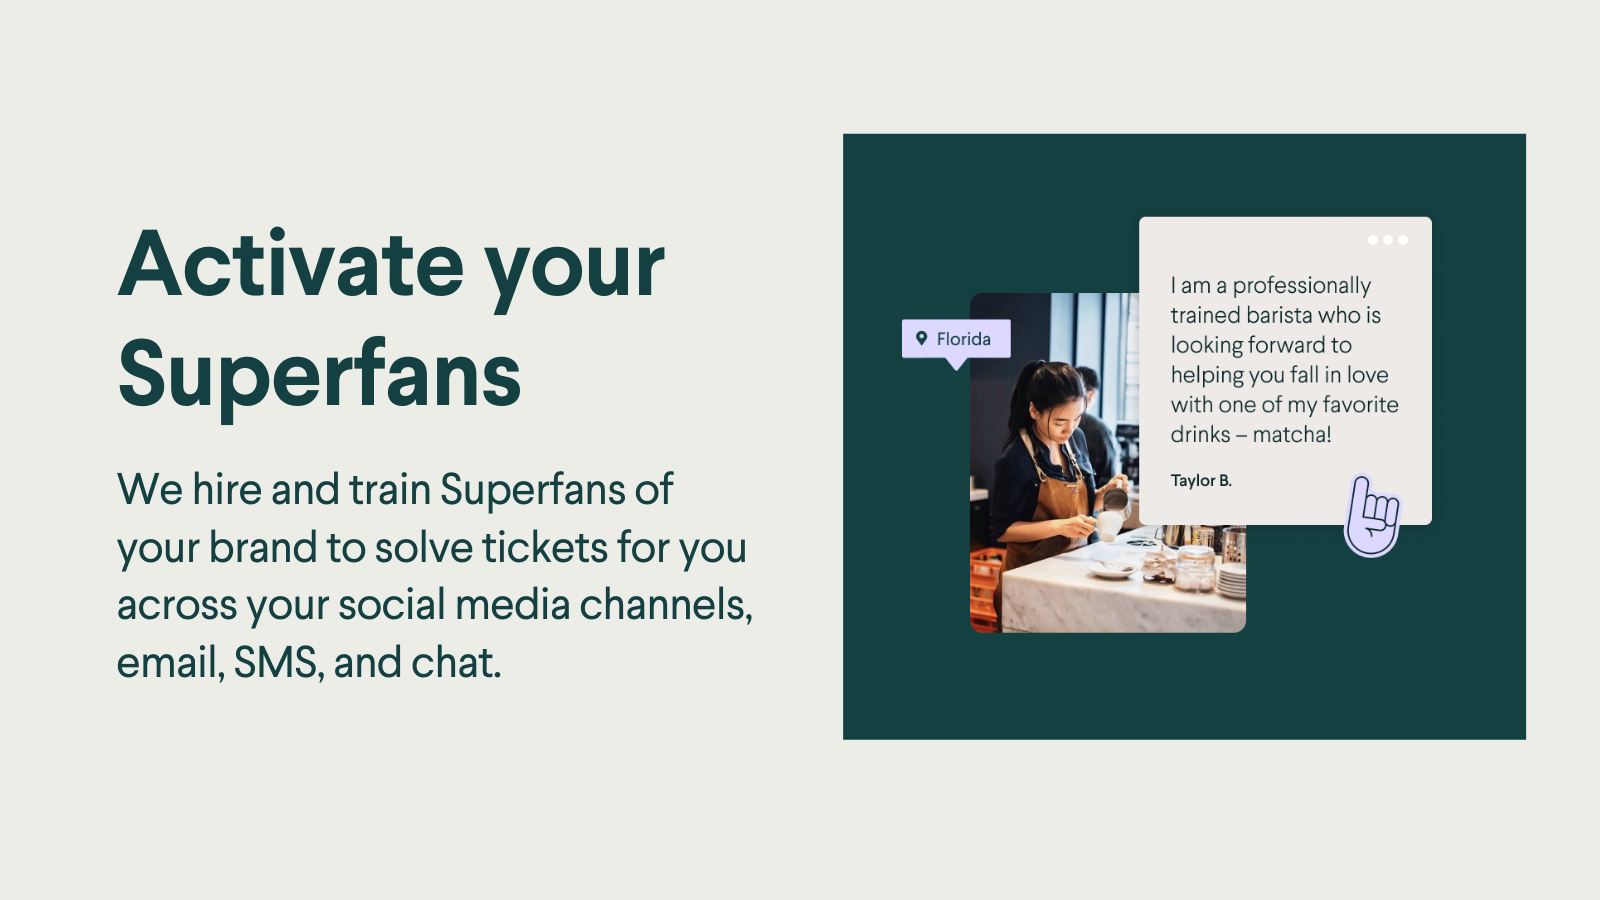 We train Superfans of your brand to solve tickets for you